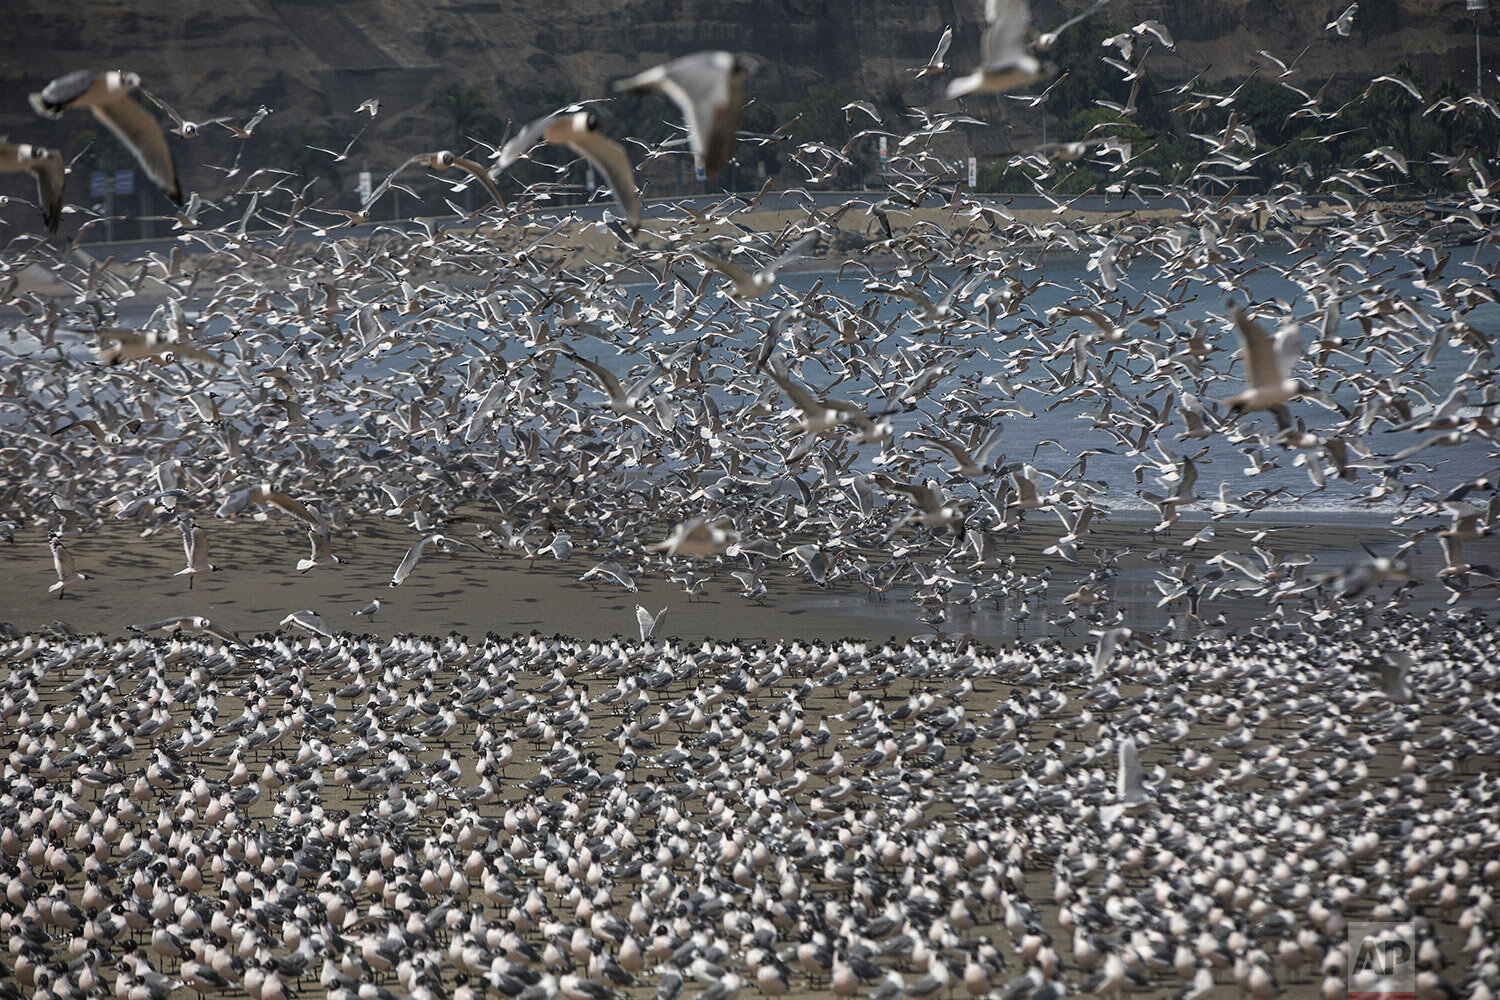  Thousands of birds flock to Agua Dulce beach now largely absent of beachgoers since Peru's president declared a state emergency and ordered people to stay home to help reduce the spread of COVID-19, in Lima, Peru, March 24, 2020.  (AP Photo/Rodrigo 